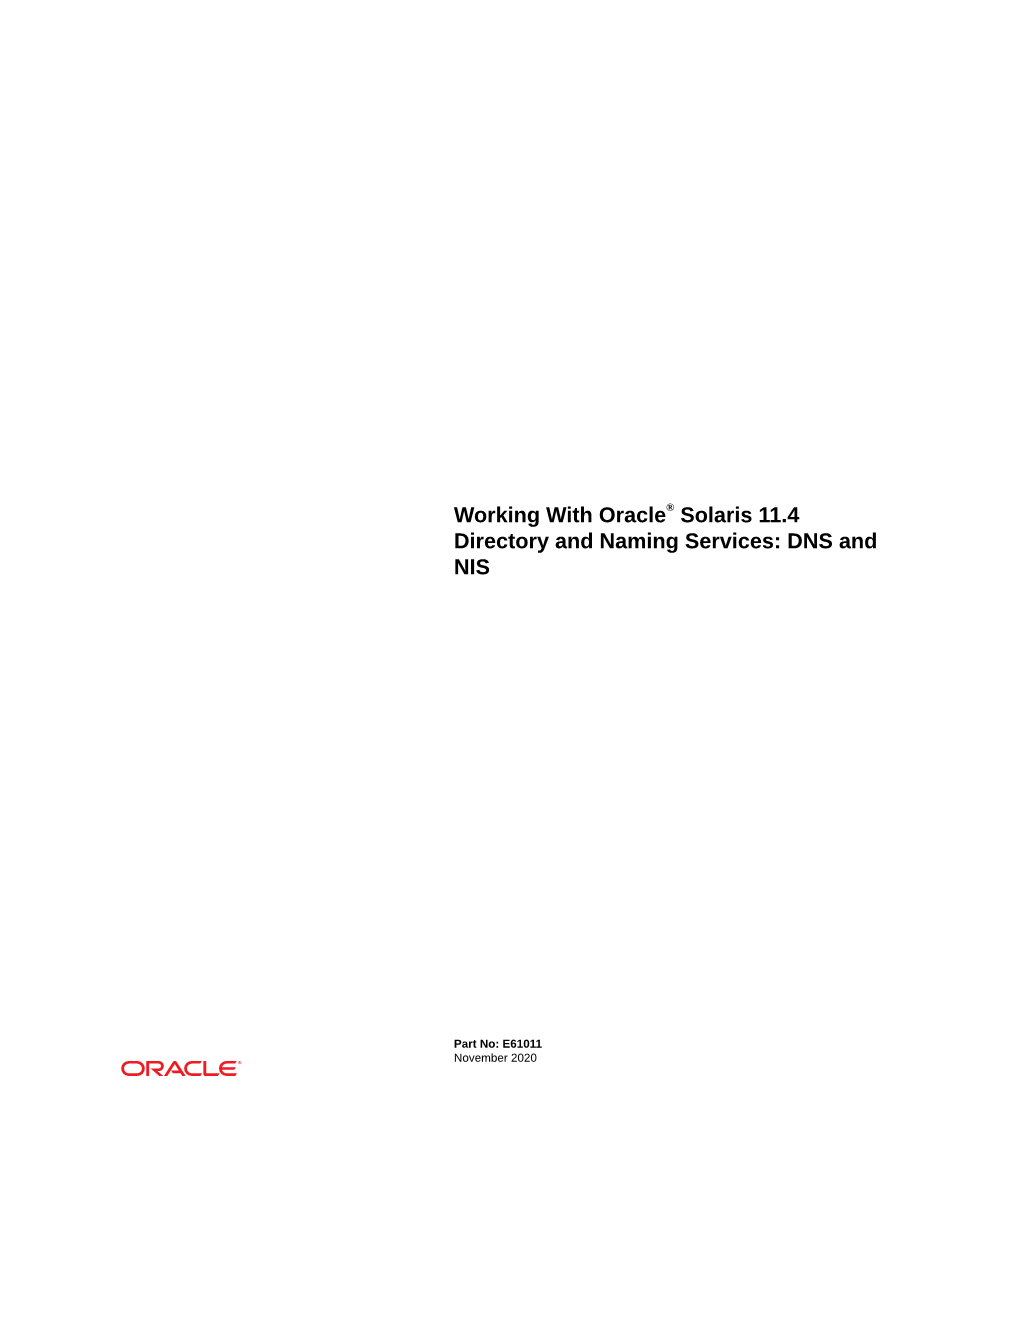 Working with Oracle® Solaris 11.4 Directory and Naming Services